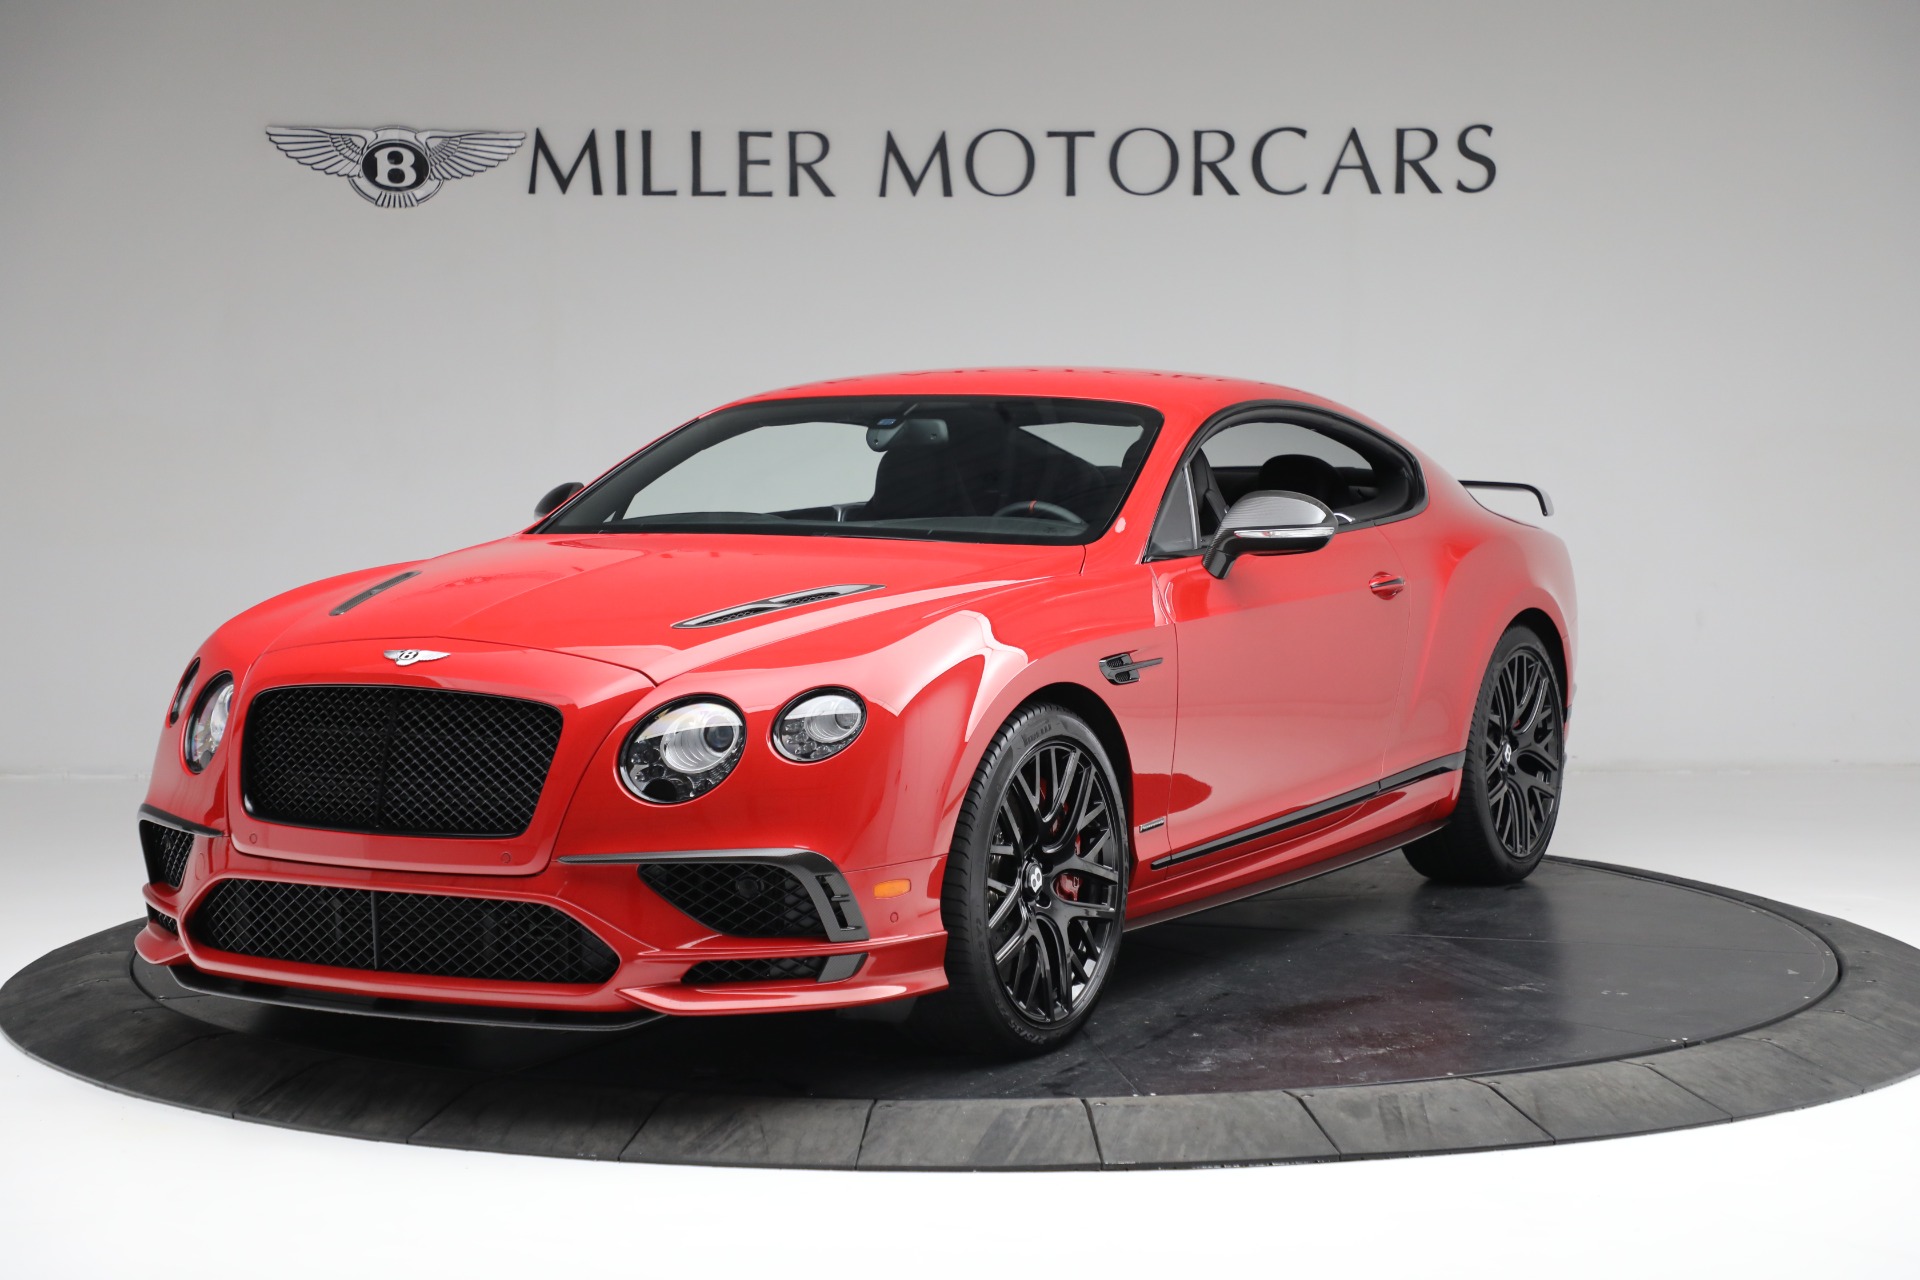 Used 2017 Bentley Continental GT Supersports for sale Sold at Maserati of Greenwich in Greenwich CT 06830 1